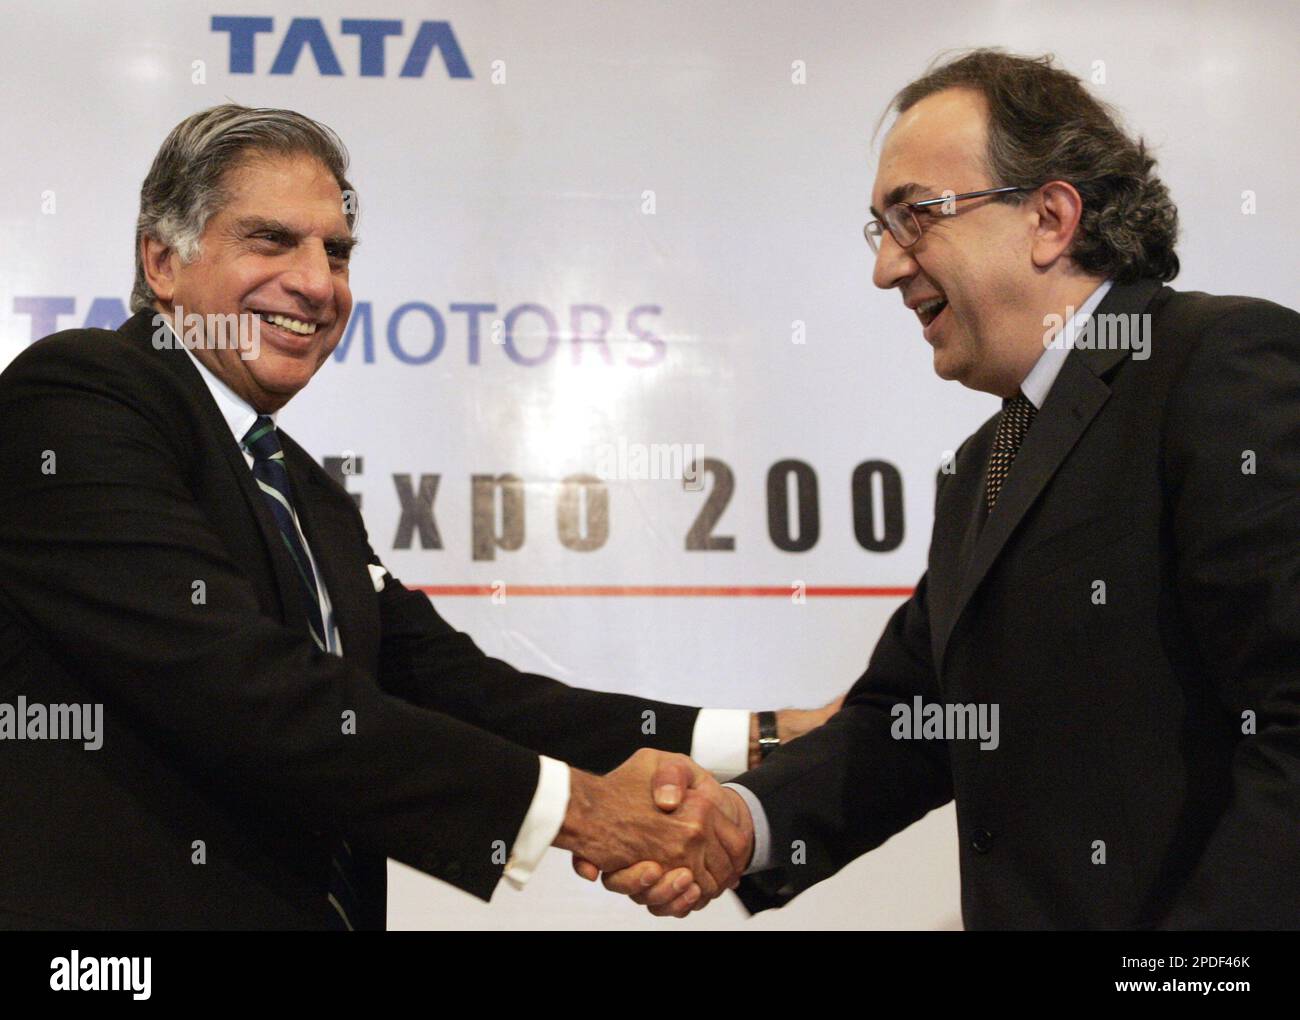 Ratan Tata, left, Chairman of TATA group of companies and Sergio  Marchionne, CEO of FIAT S.p.A. shake hands at the 8th Auto Expo in New  Delhi, India, Friday Jan.13, 2006. FIAT and